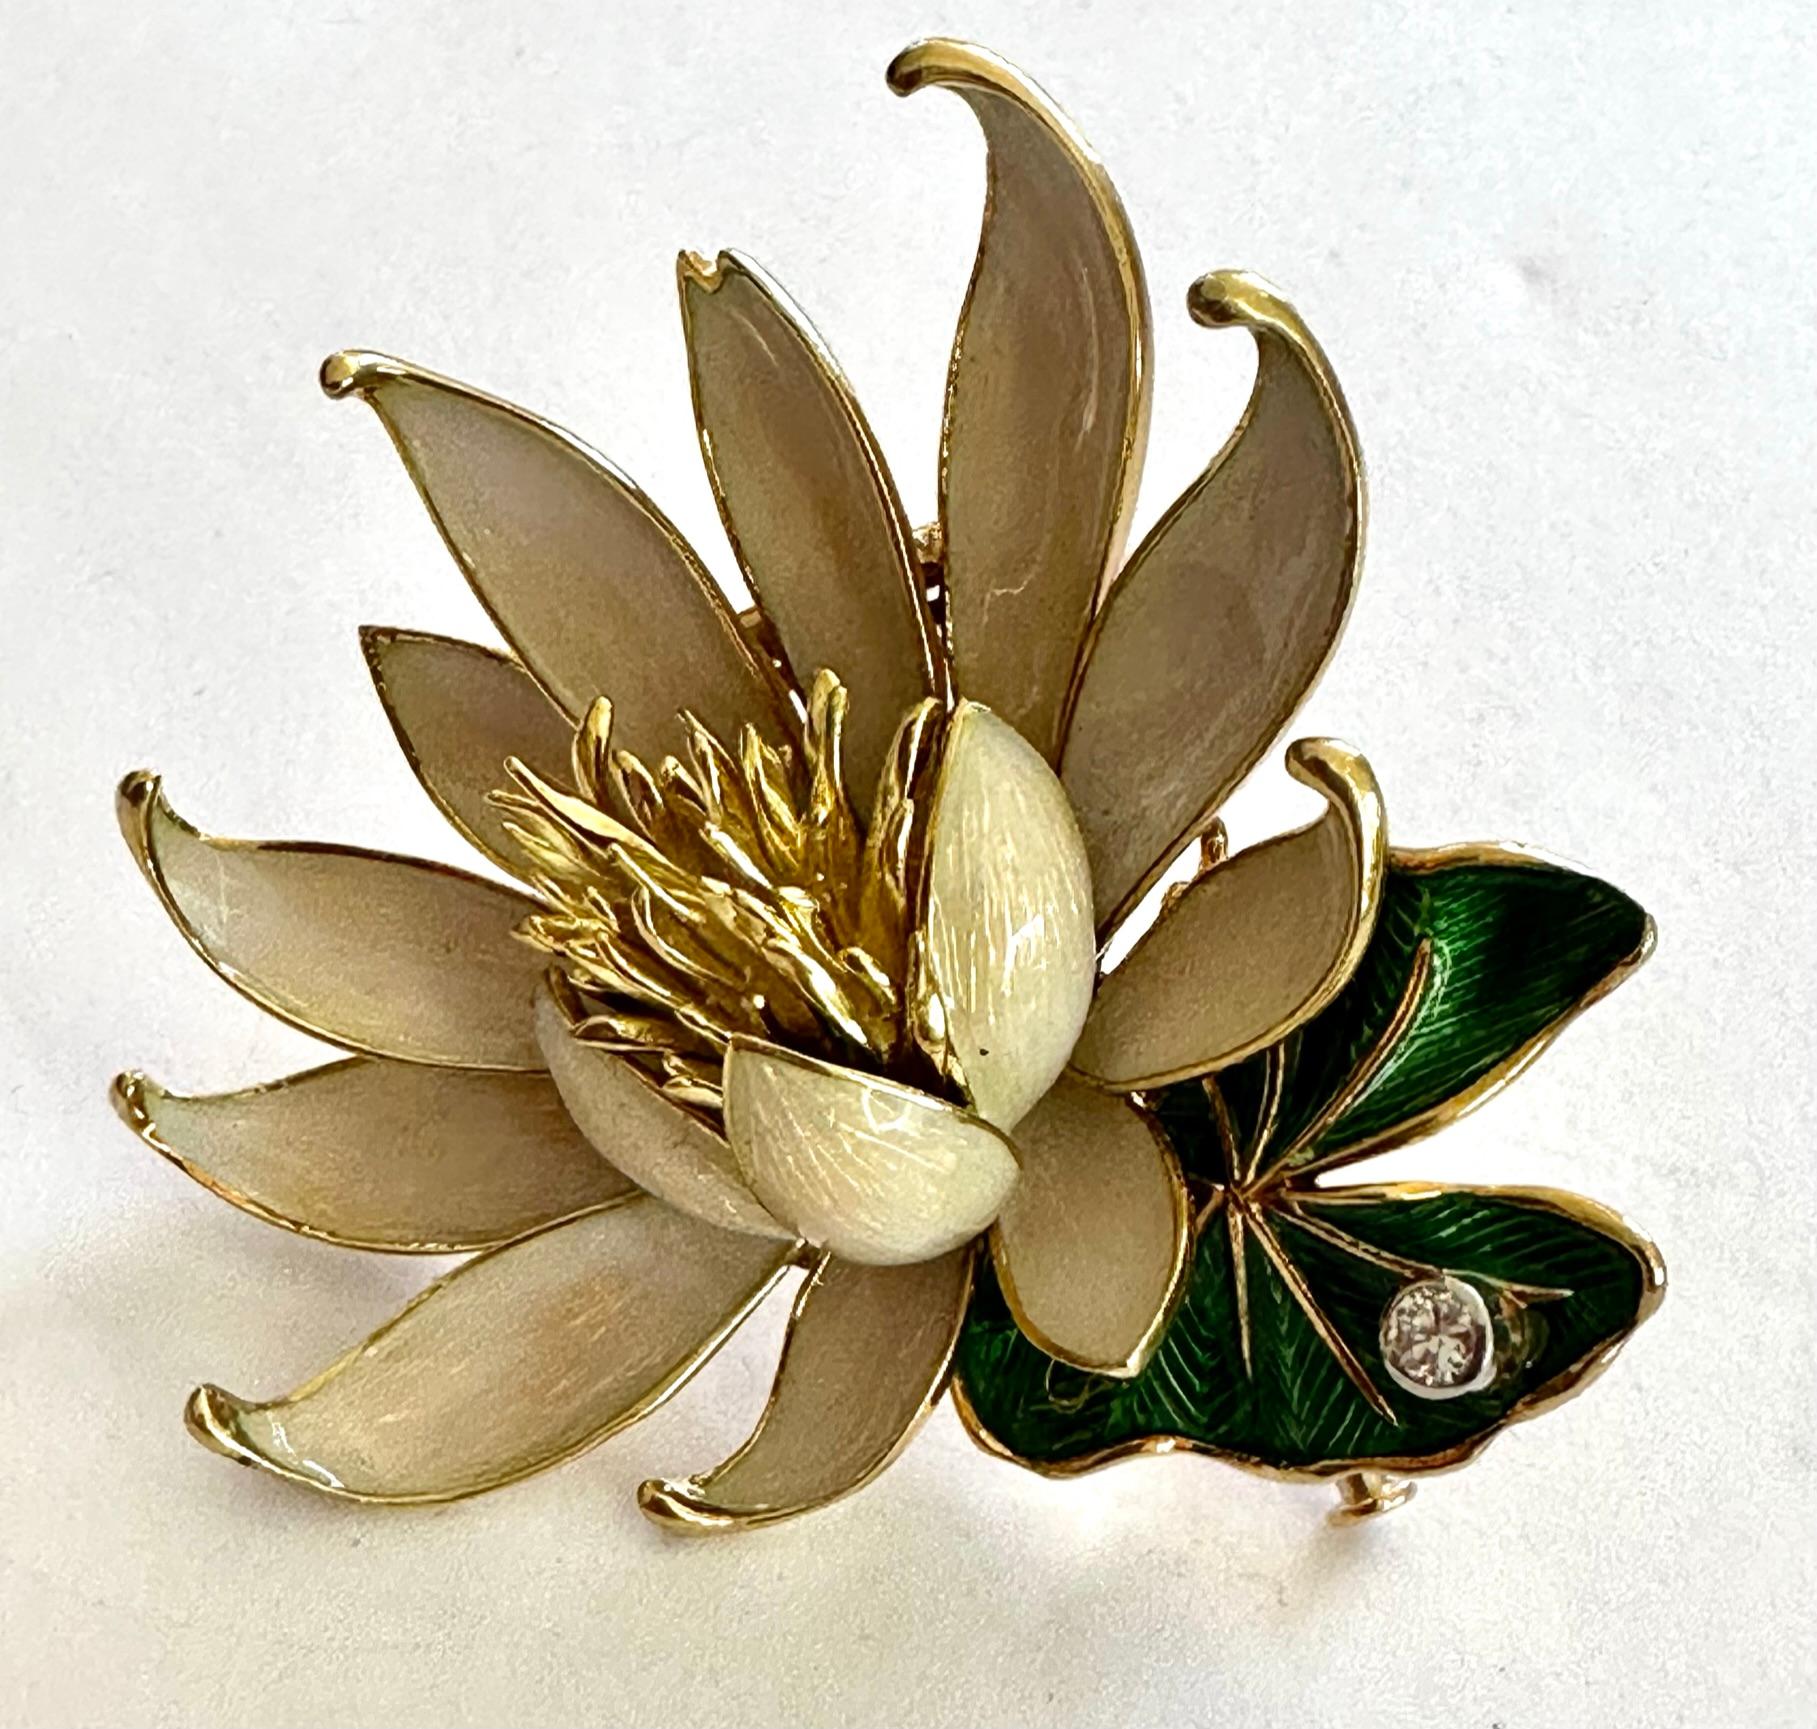 An 18K. yellow gold brooch with white and green enamel, signed: Bonebakker and provided with French hallmarks which refer to the maker: Mauboussin
A brilliant cut diamond of 0.12 ct VS/F
Equipped with a clip mechanism with two needles
Weight: 32.89